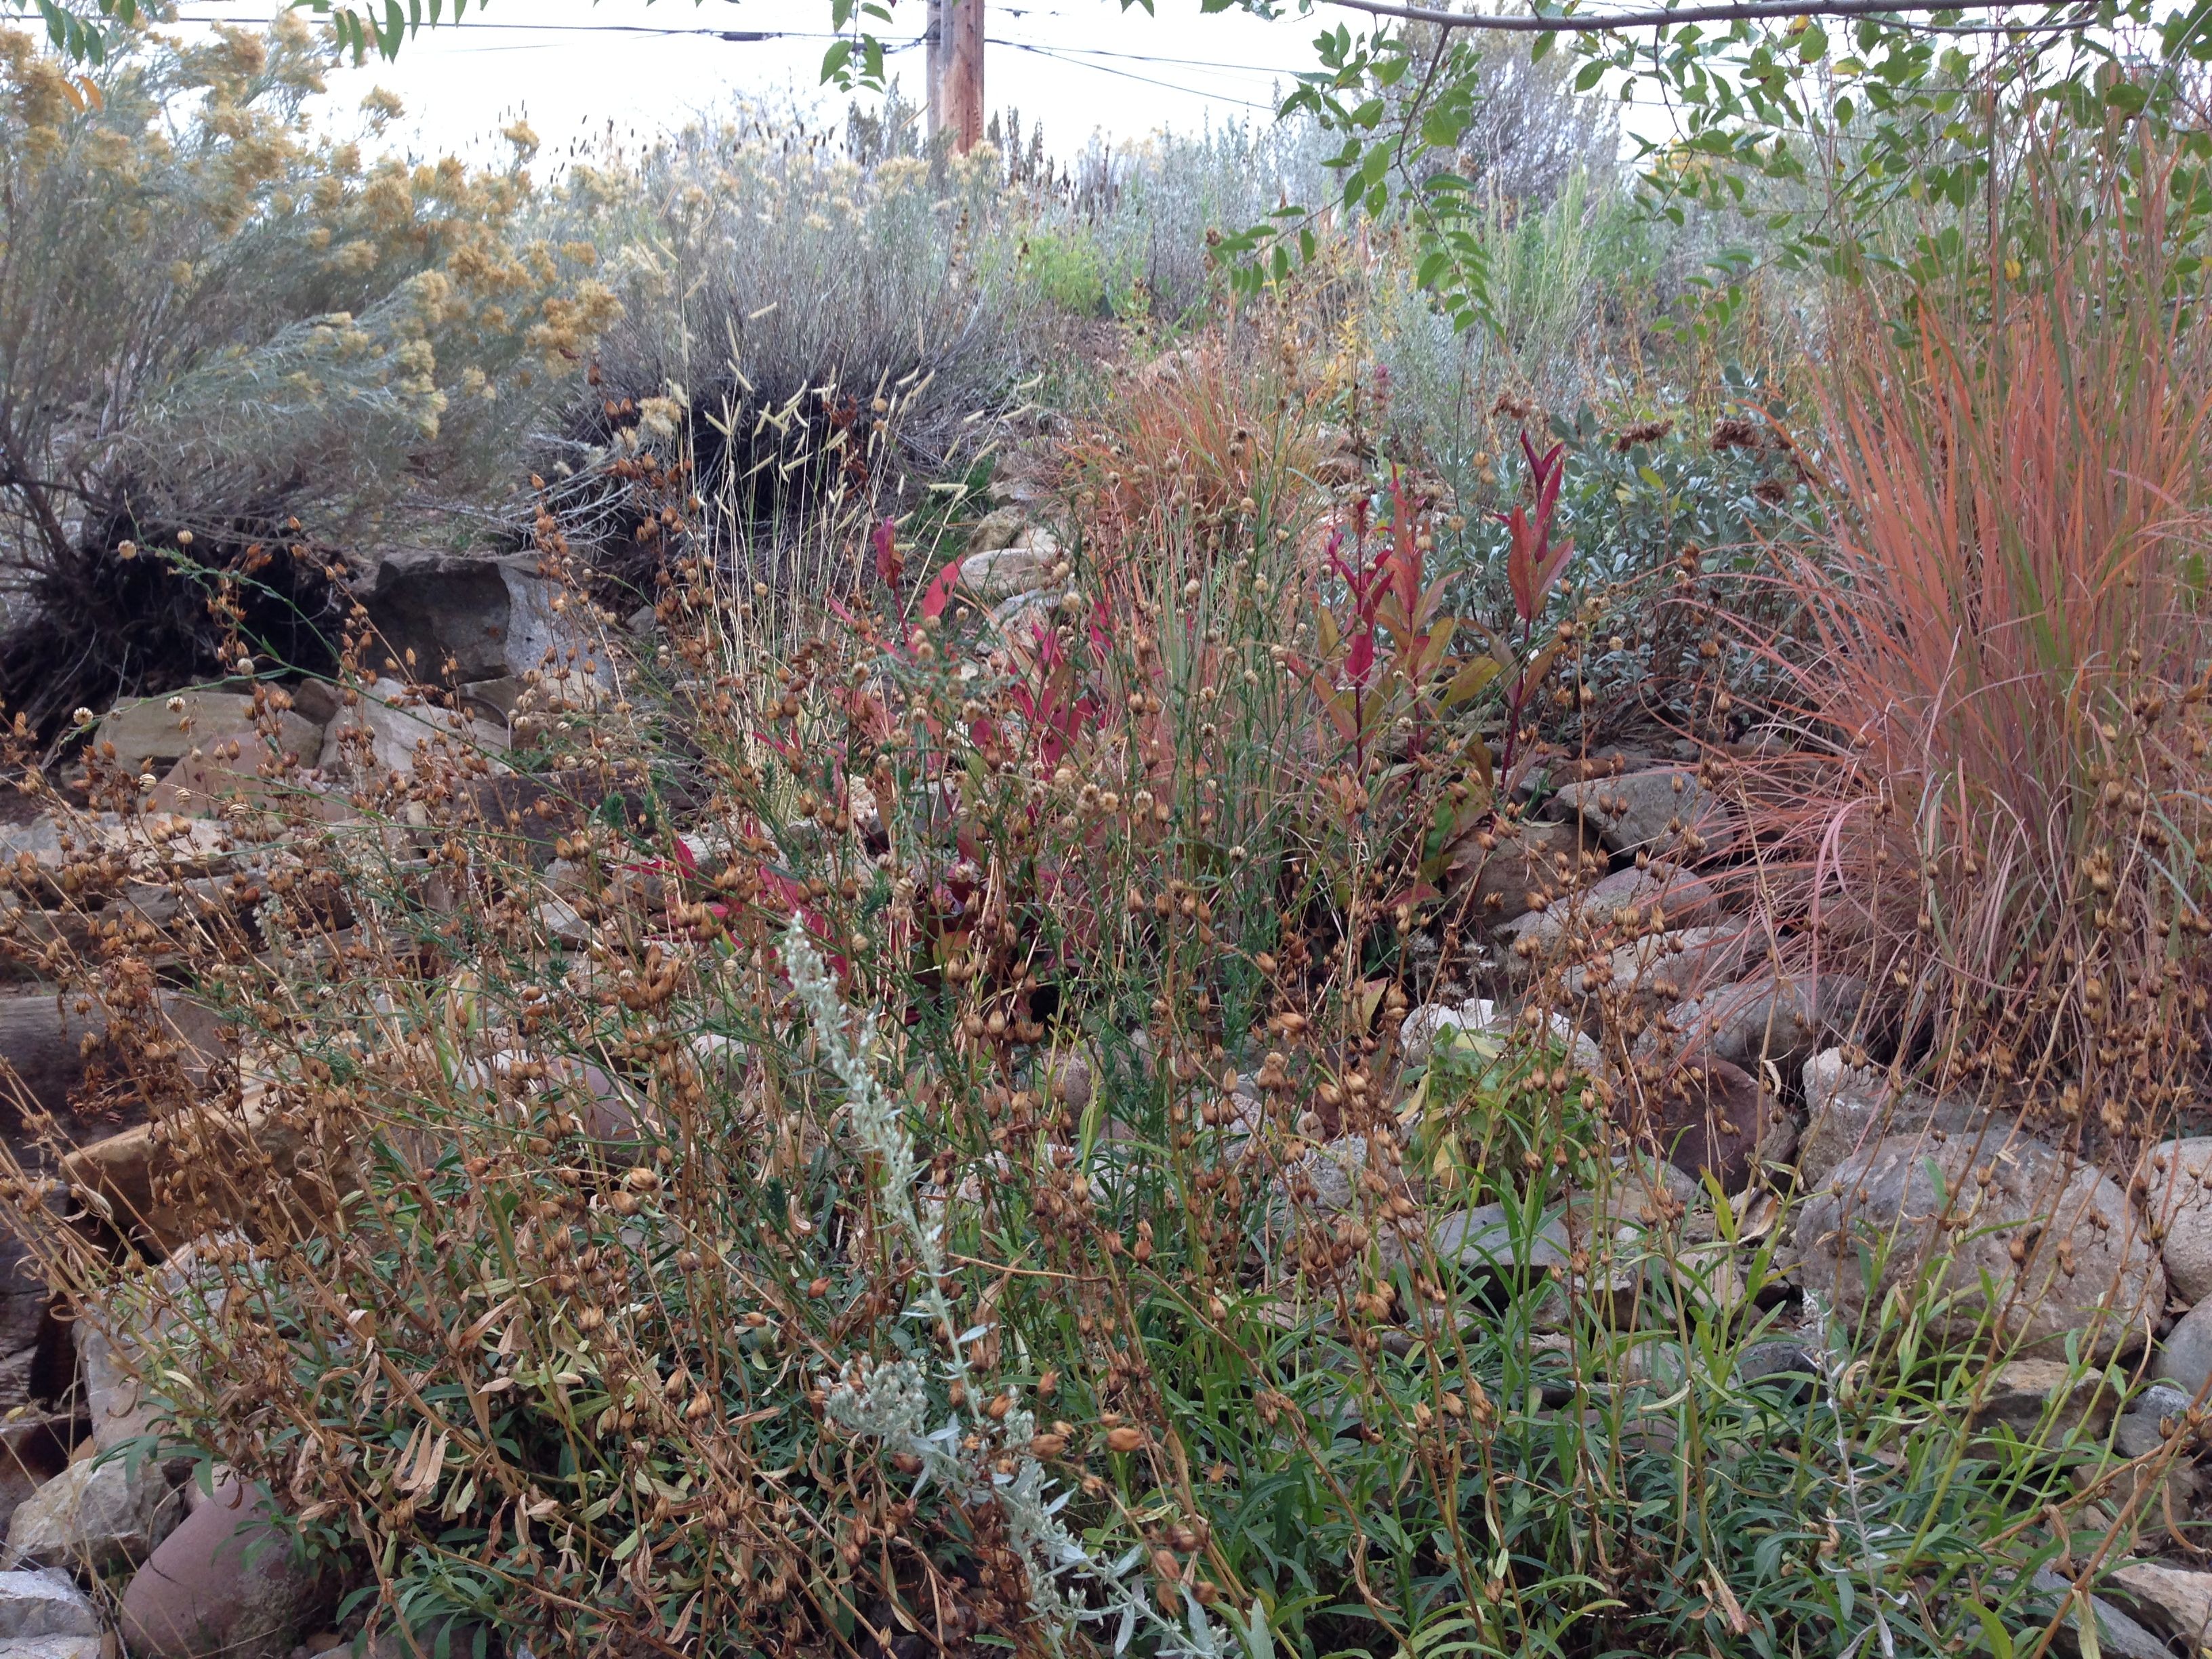 Flowers and grasses show their warm fall colors.